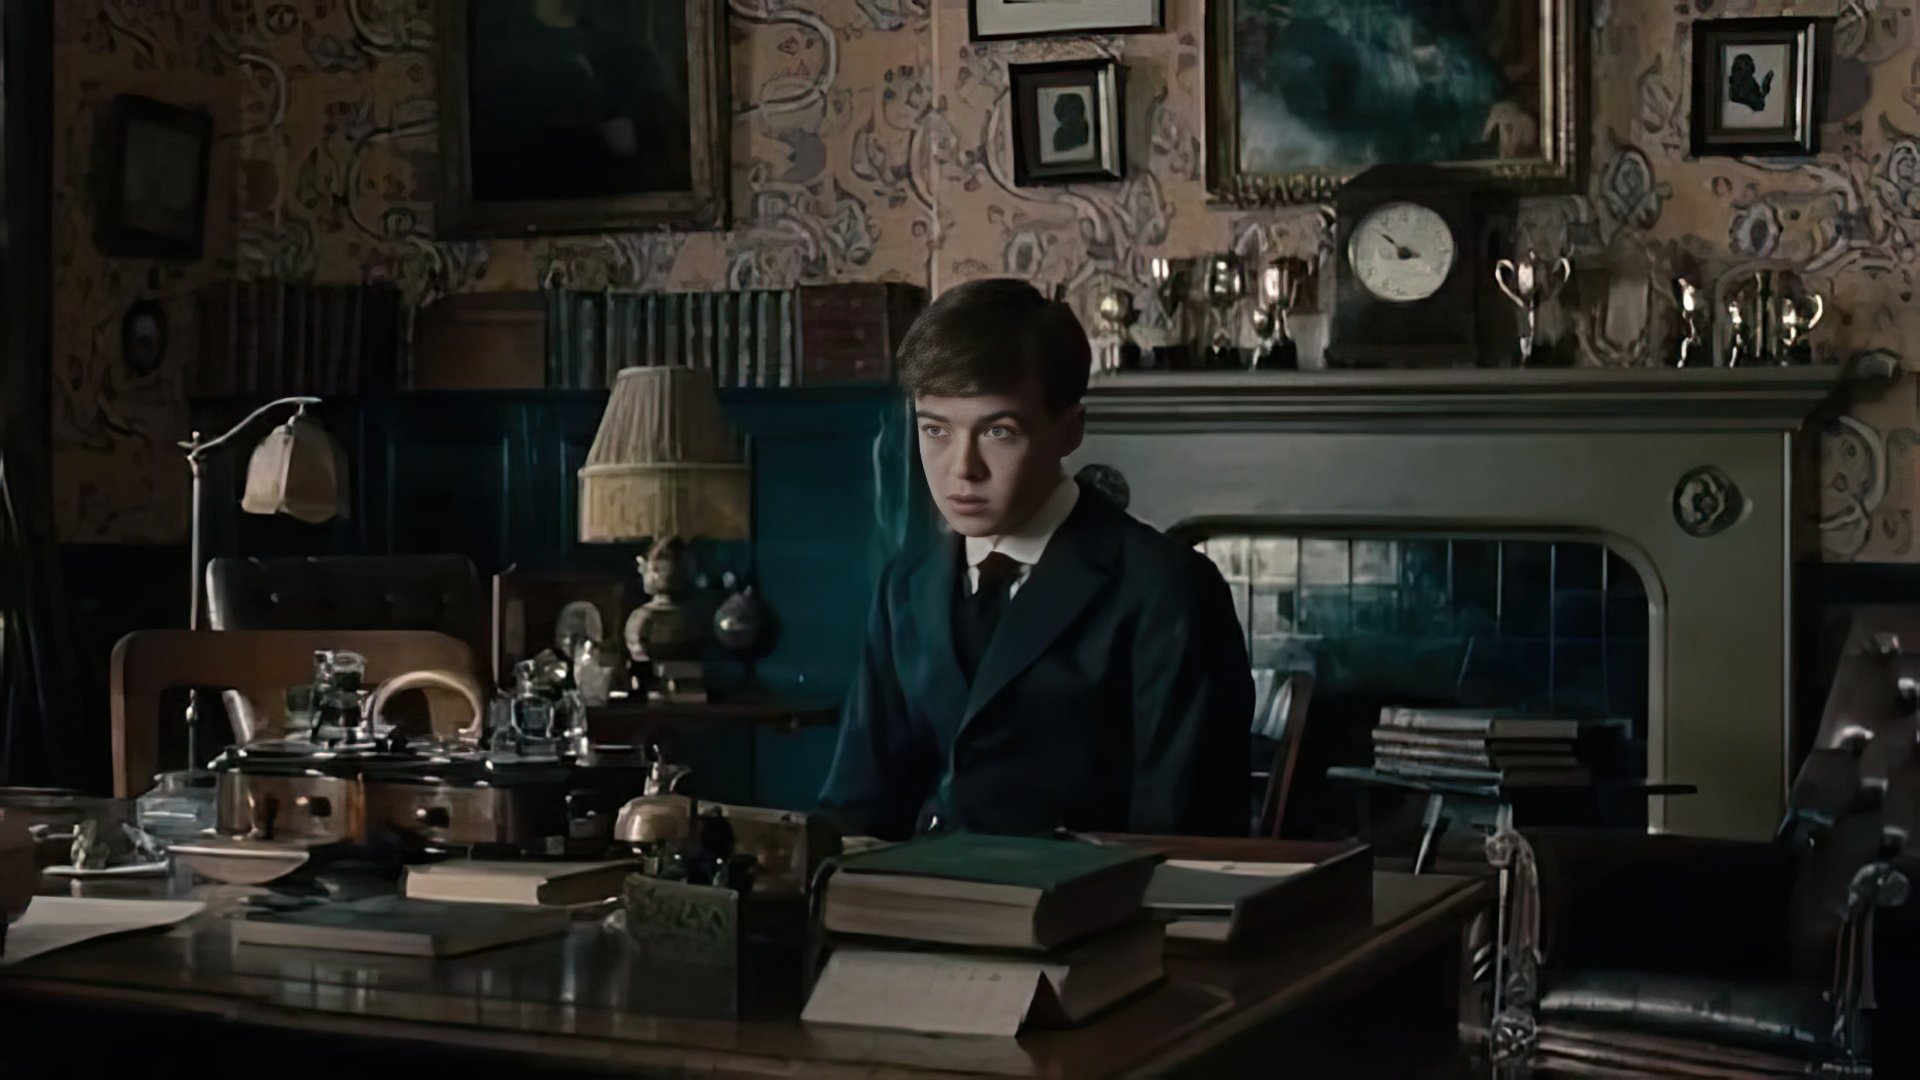 Alex Lawther in the movie 'The Imitation Game'